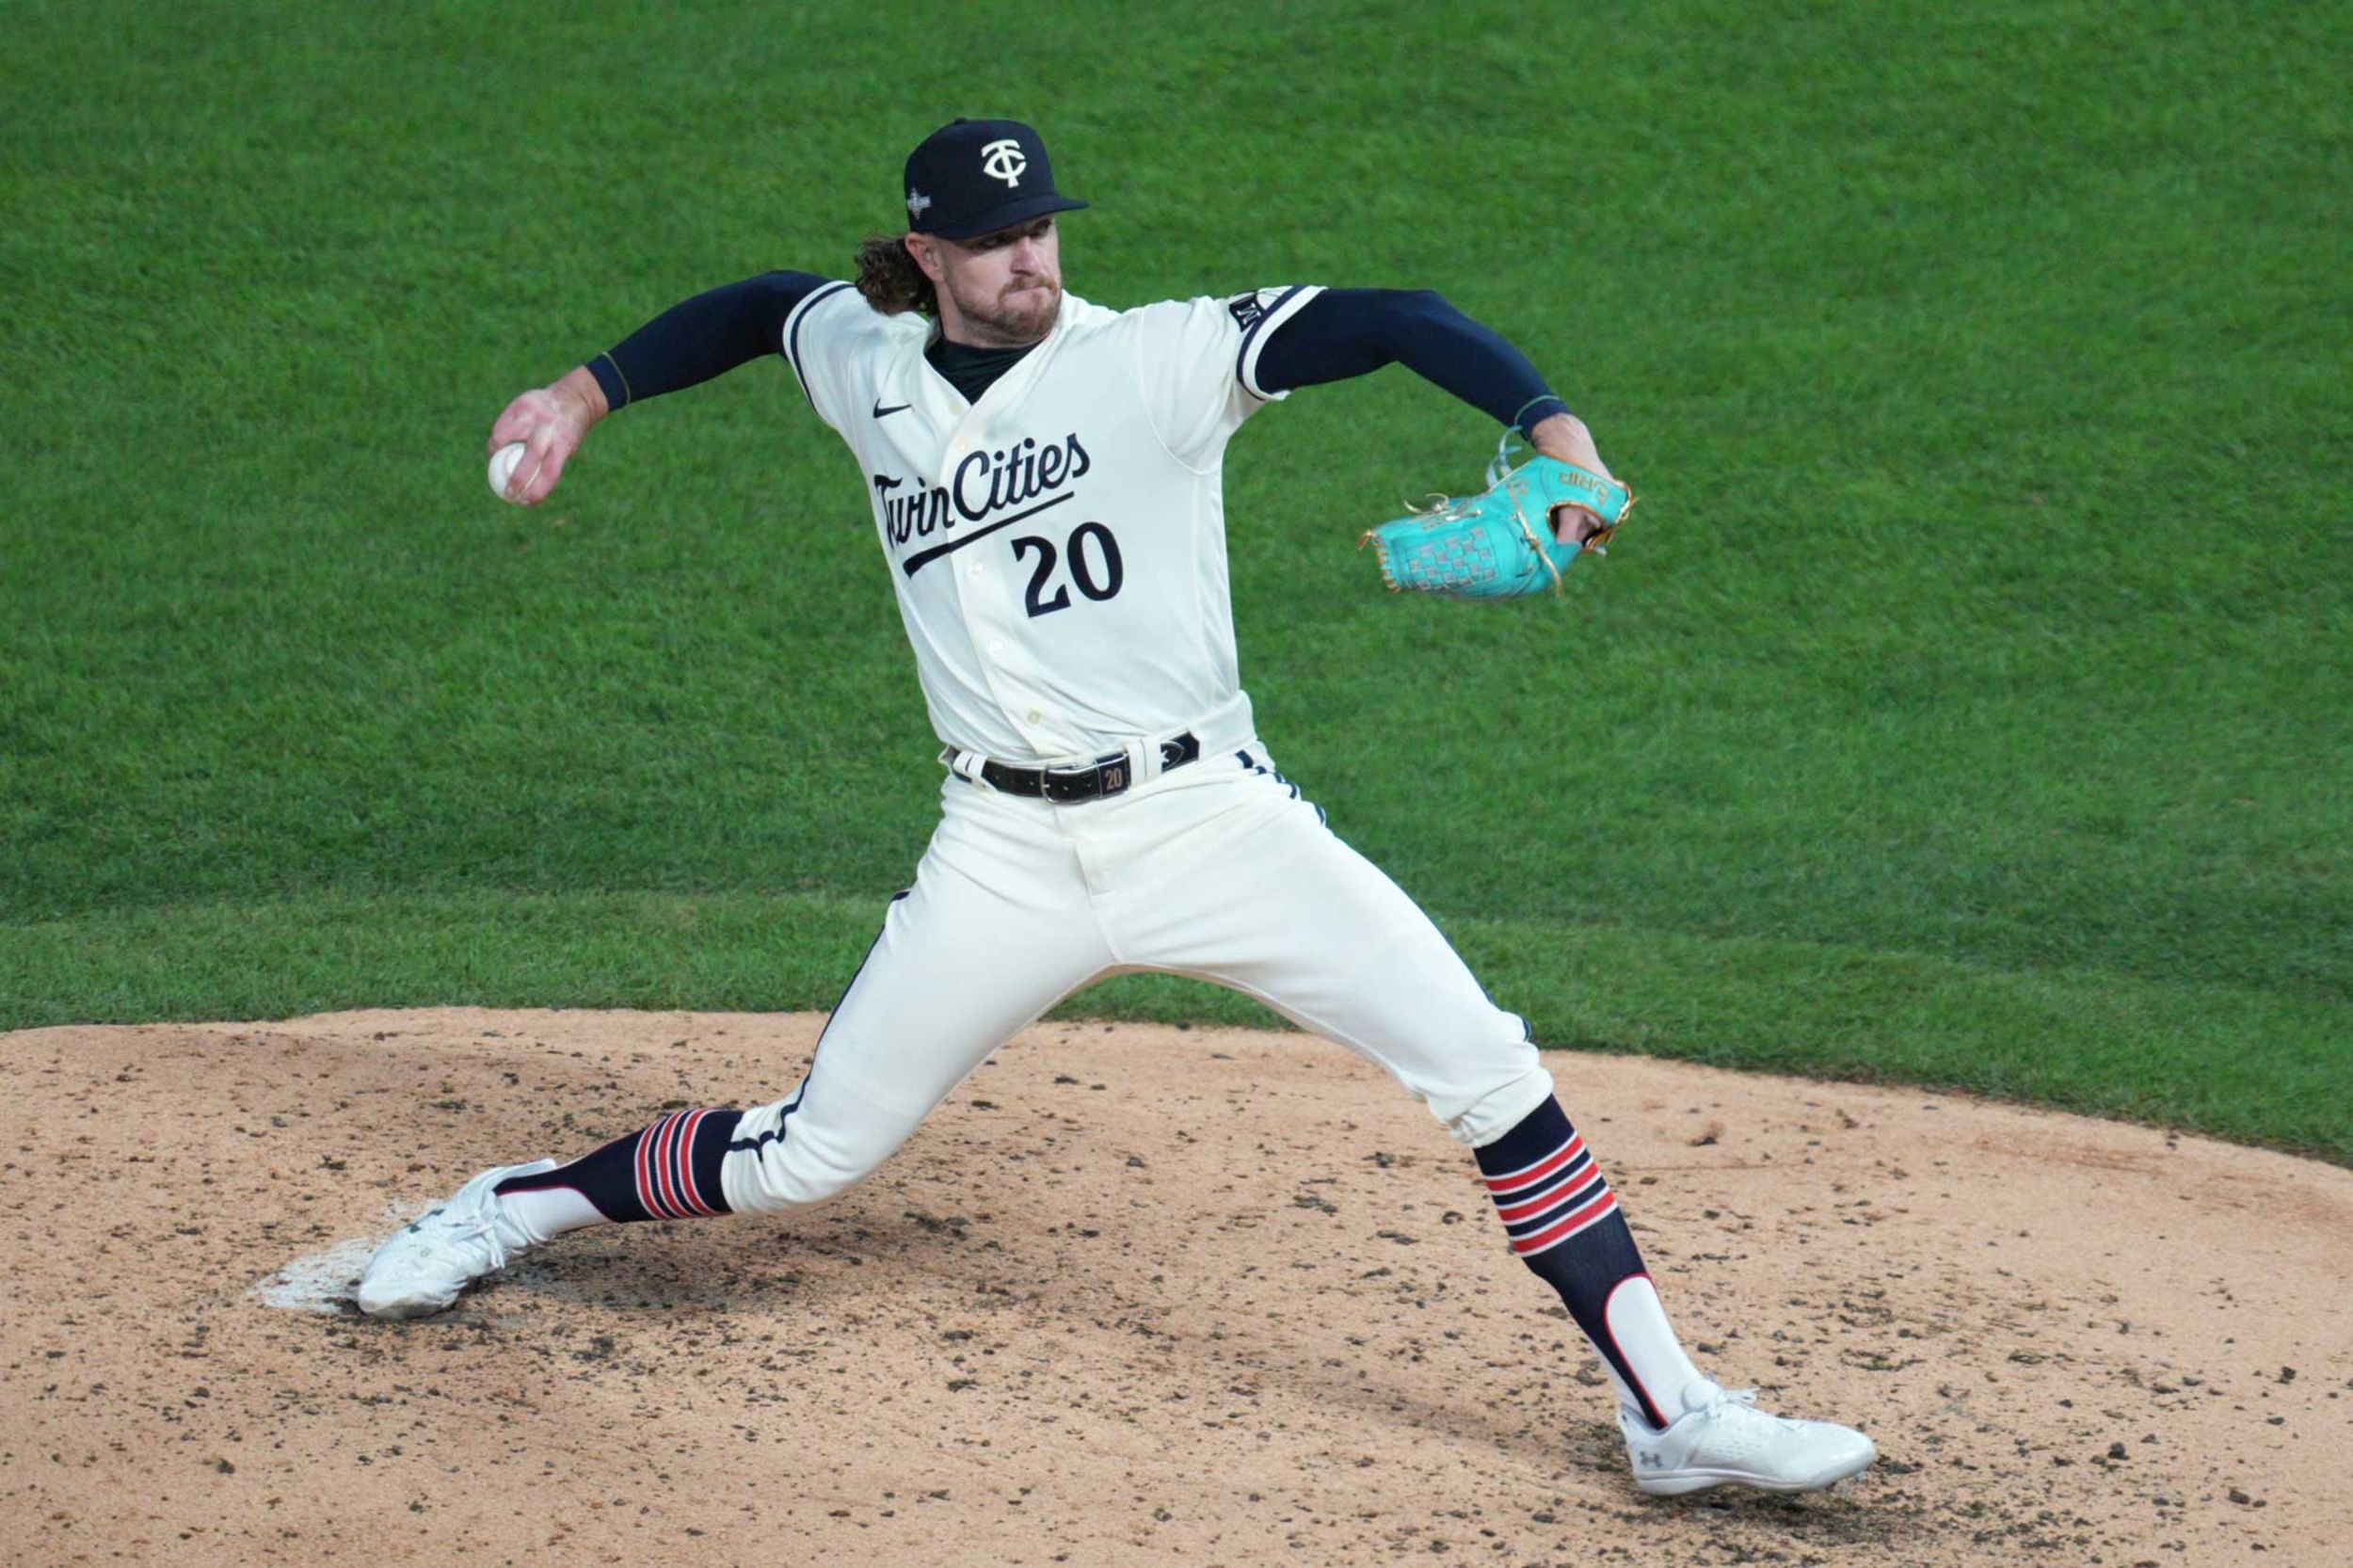 <p>The loss of Sonny Gray in free agency leaves a major void in the starting rotation that Minnesota hopes Paddack can fill. He looked terrific late last season after returning from Tommy John surgery and has a track record of past success, including a 3.33 ERA in 26 starts with San Diego in 2019.</p><p>You may also like: <a href='https://www.yardbarker.com/mlb/articles/the_hardest_throwing_pitchers_in_mlb_030324/s1__39858942'>The hardest-throwing pitchers in MLB</a></p>